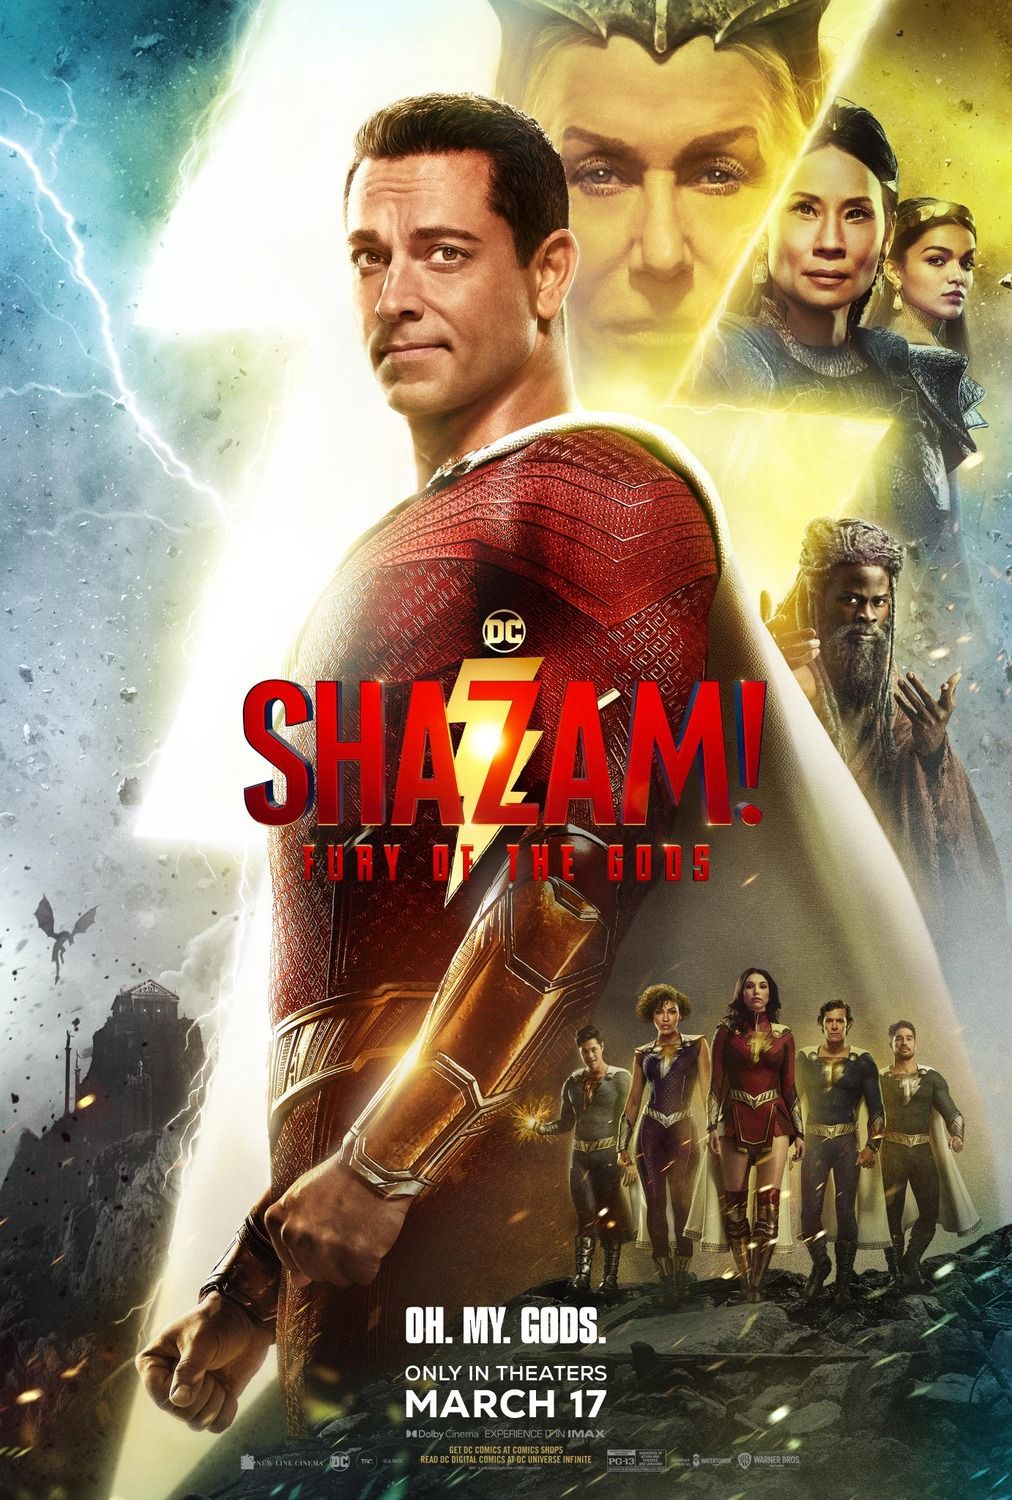 The movie poster for Shazam! Fury of the Gods.